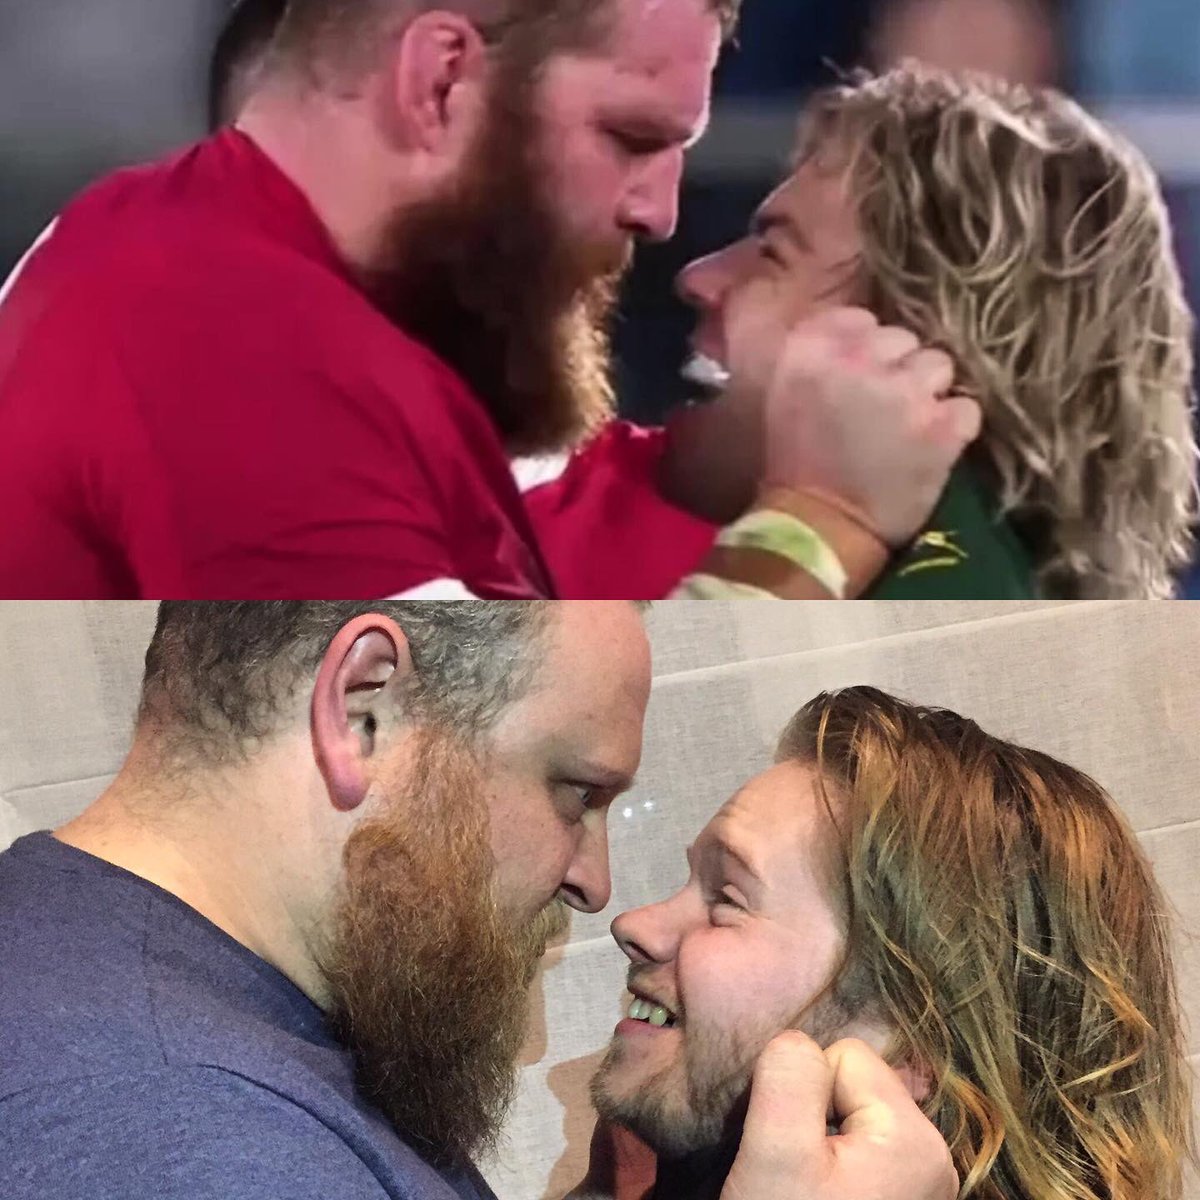 Me and my friend Joe recreated THAT shot of Jake Ball and @fafdeklerk getting in each other’s grills the other weekend 😂 #fafdeklerk #jakeball #WALvRSA #RugbyWorldCup19 #rugby #welshrugby #SouthAfricaRugby